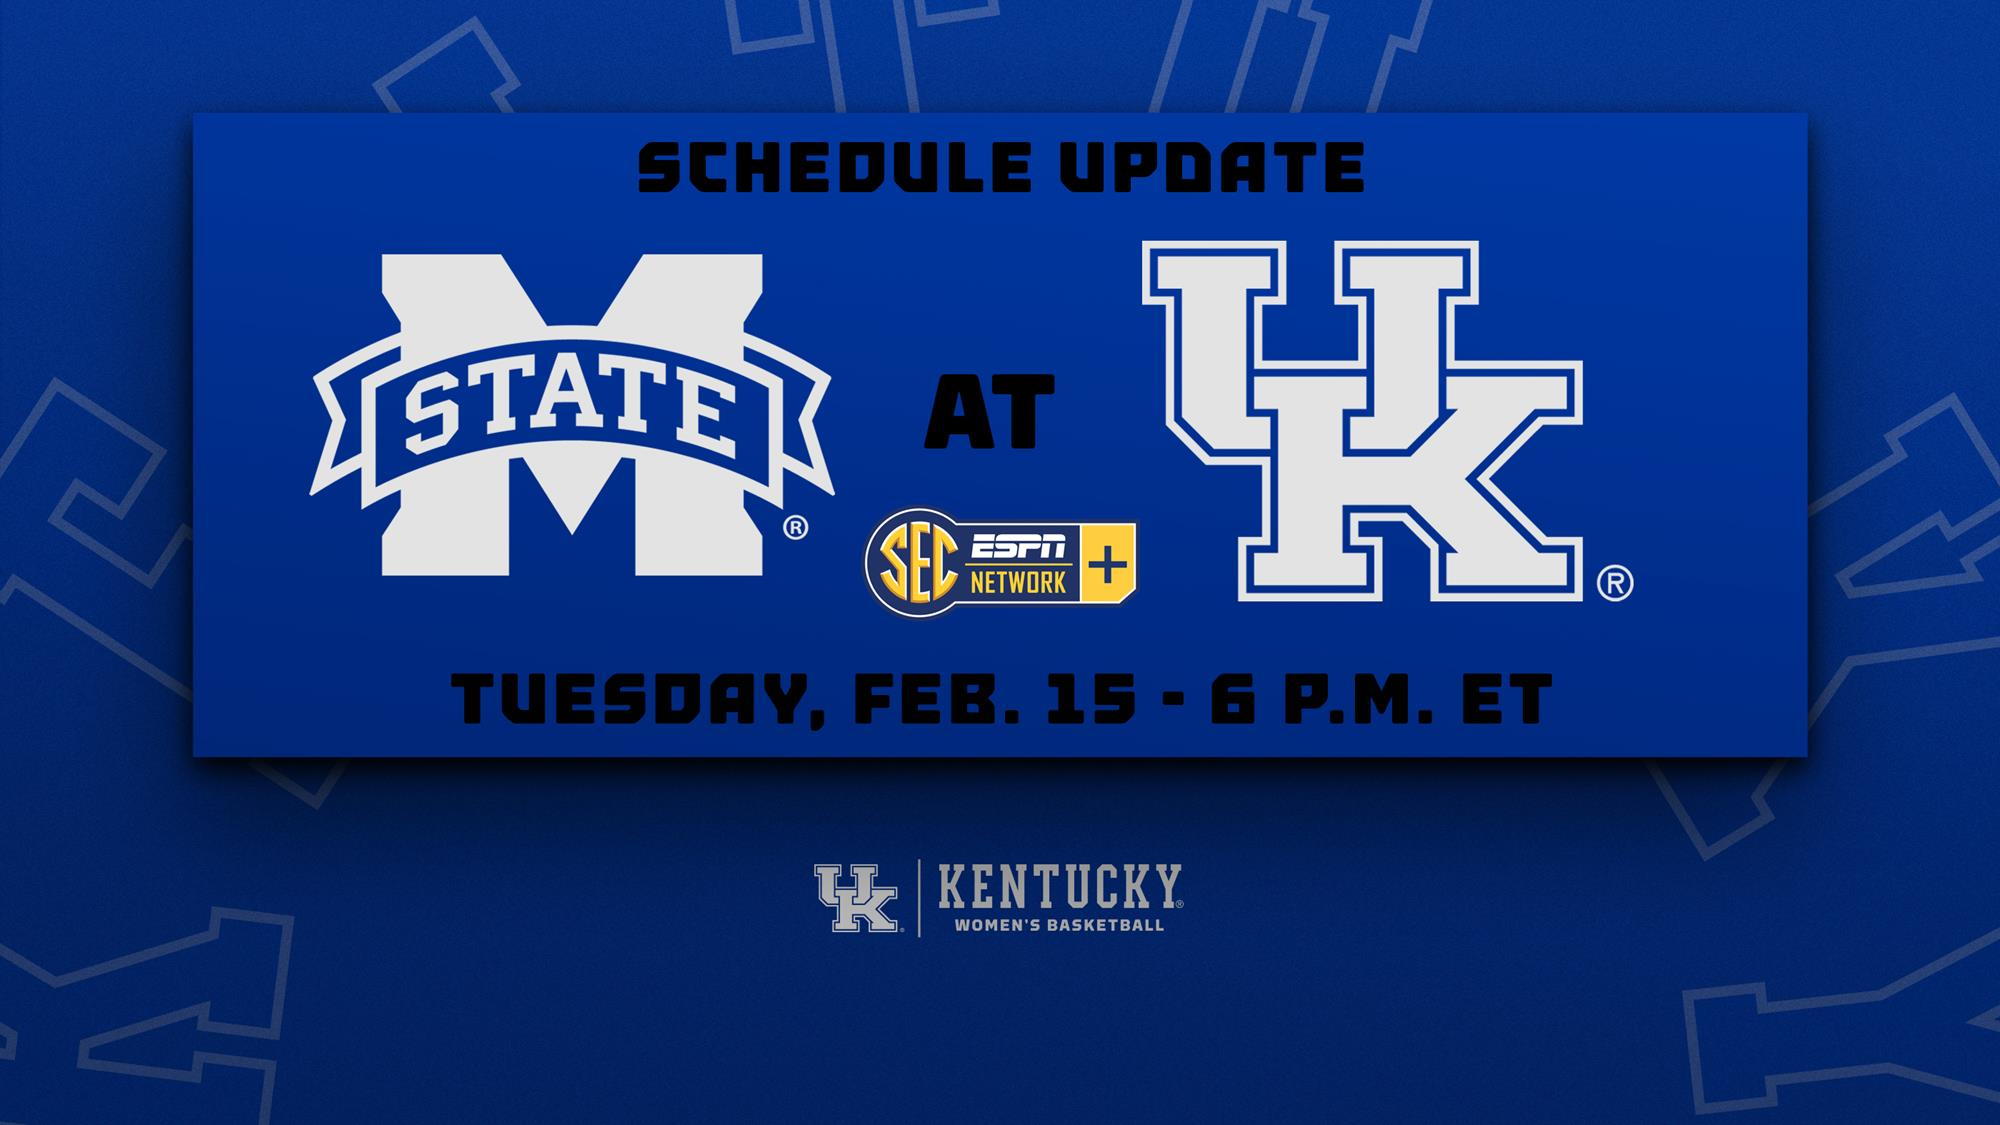 Kentucky WBB vs. Mississippi State Rescheduled for Feb. 15